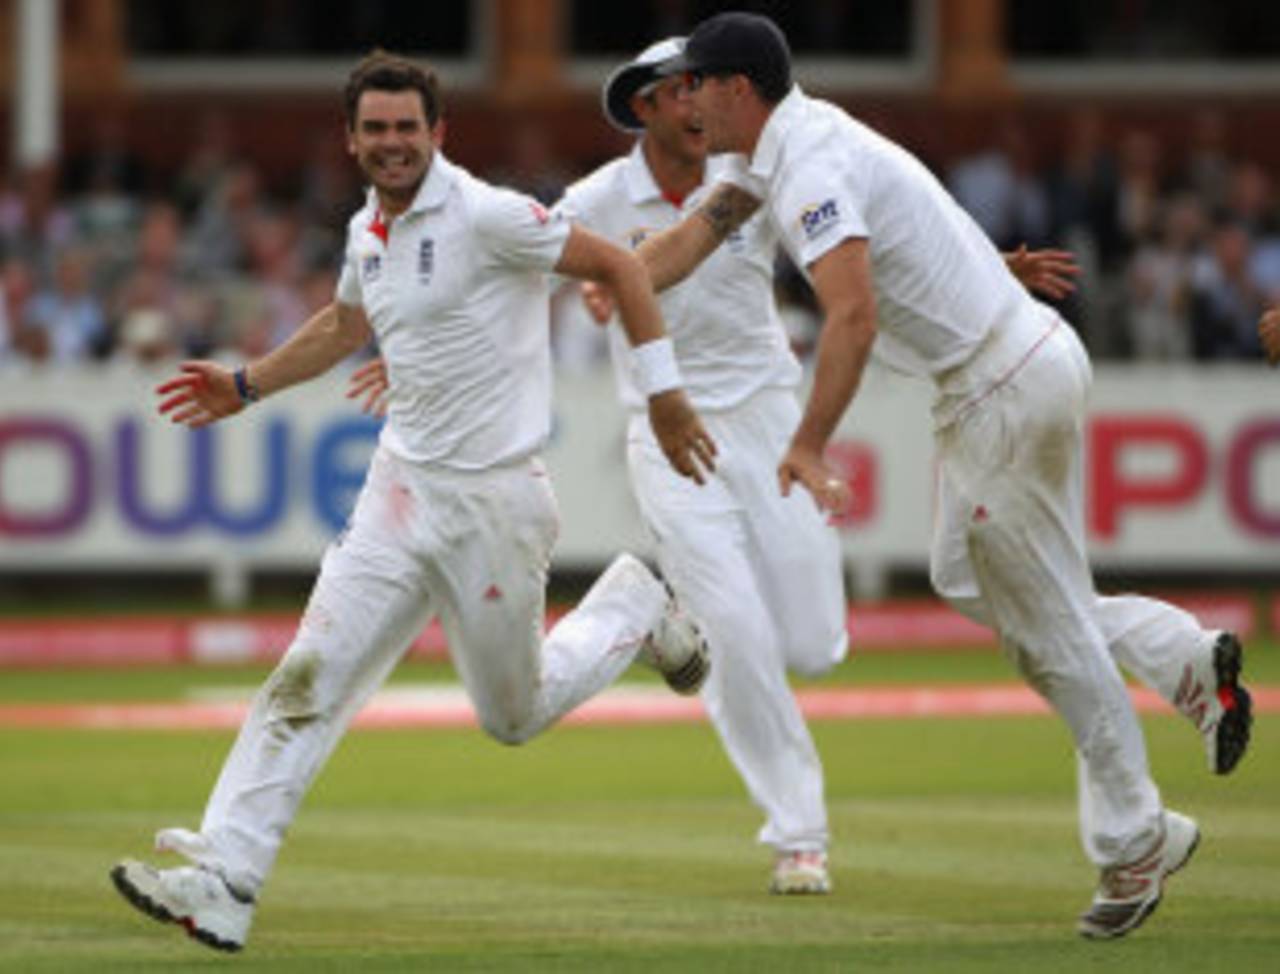 James Anderson is all smiles after picking up his fifth wicket, England v India, 1st Test, Lord's, 5th day, July 25, 2011